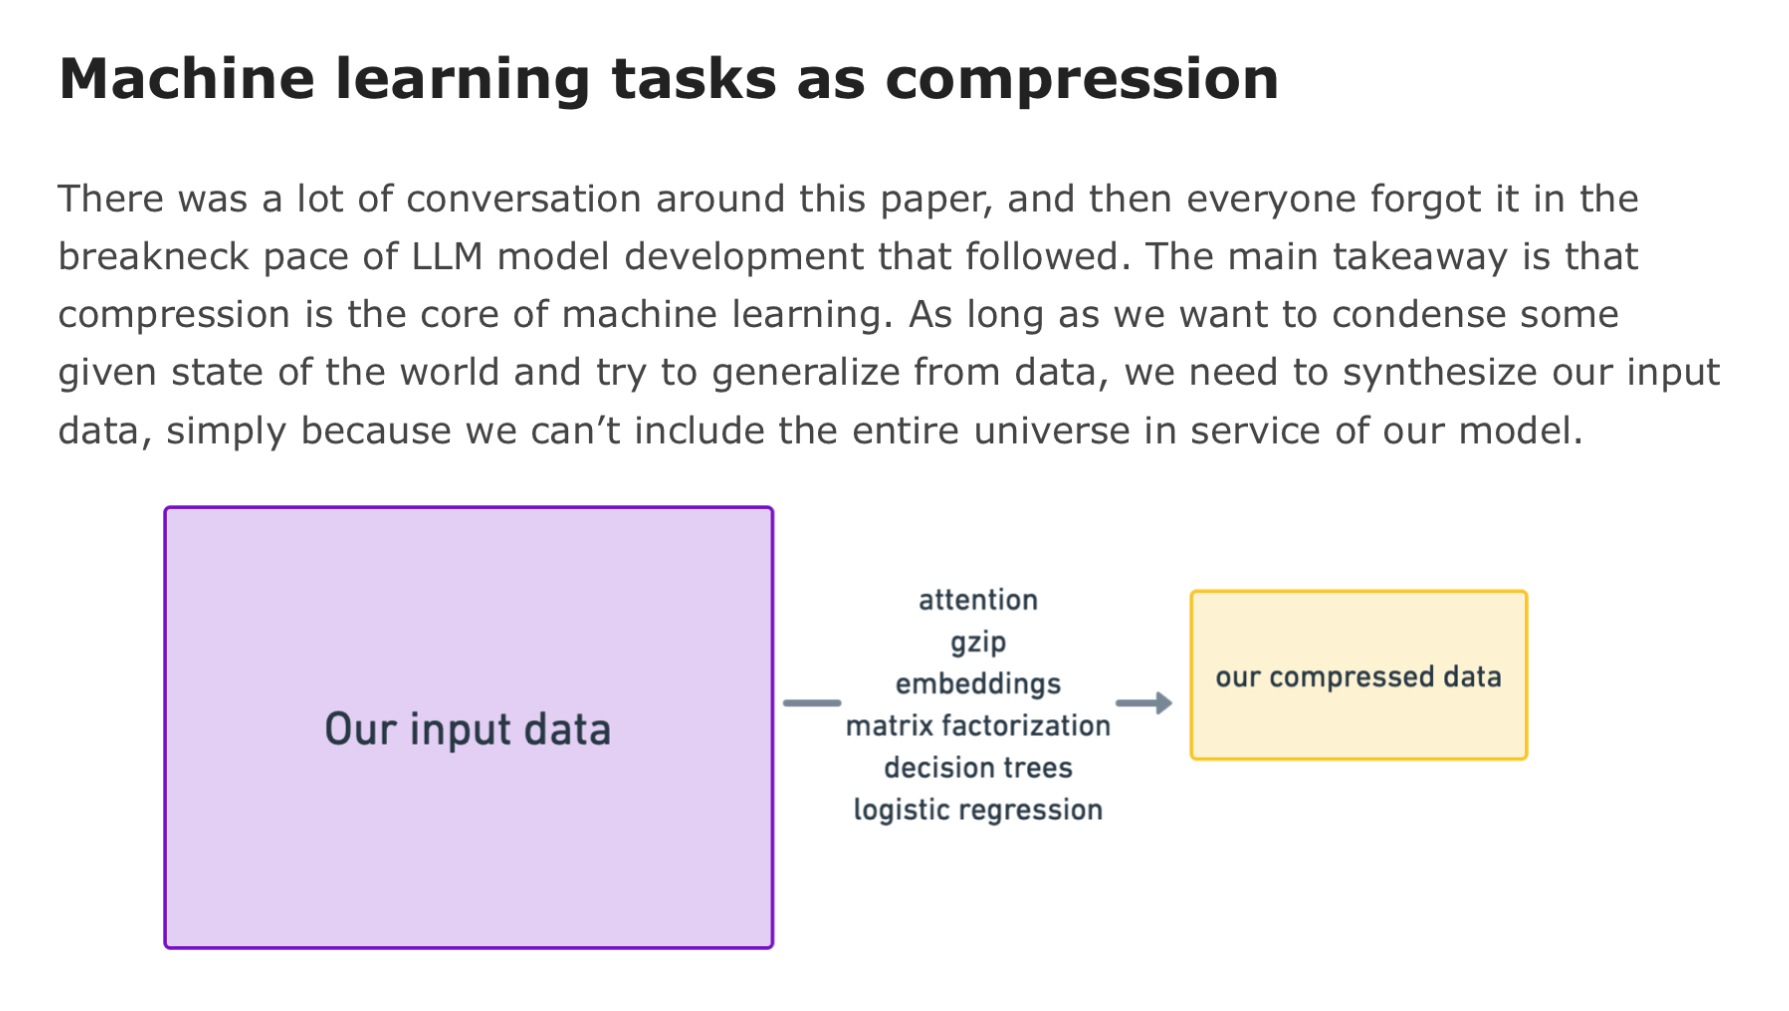 ml-as-compression